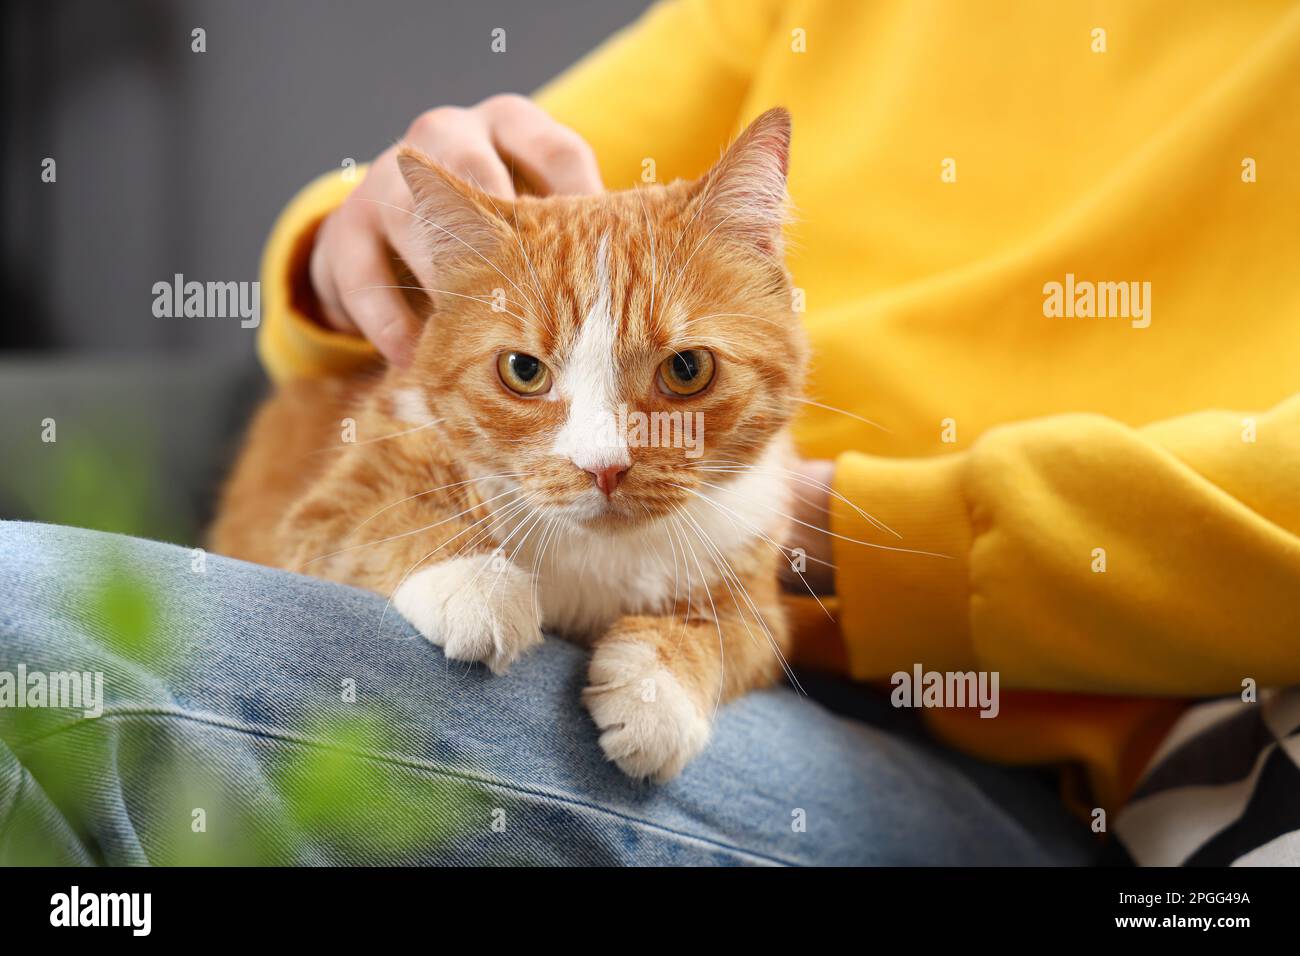 cat and owner photography